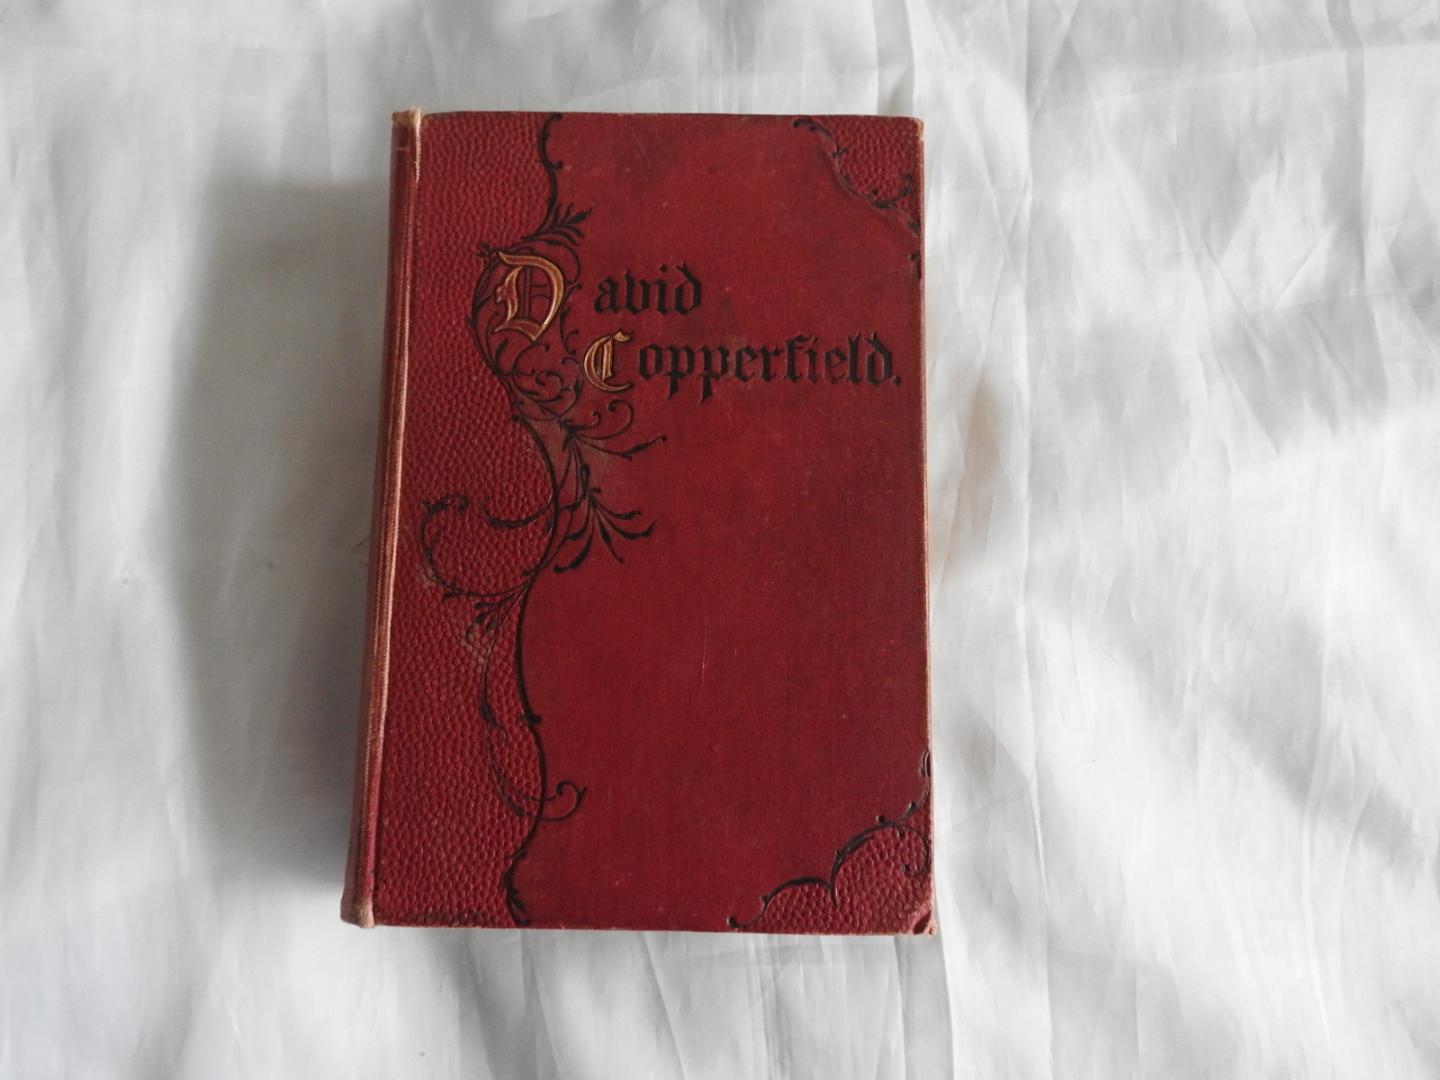 Dickens, Charles - The personal history of David Copperfield - With Frontispiece